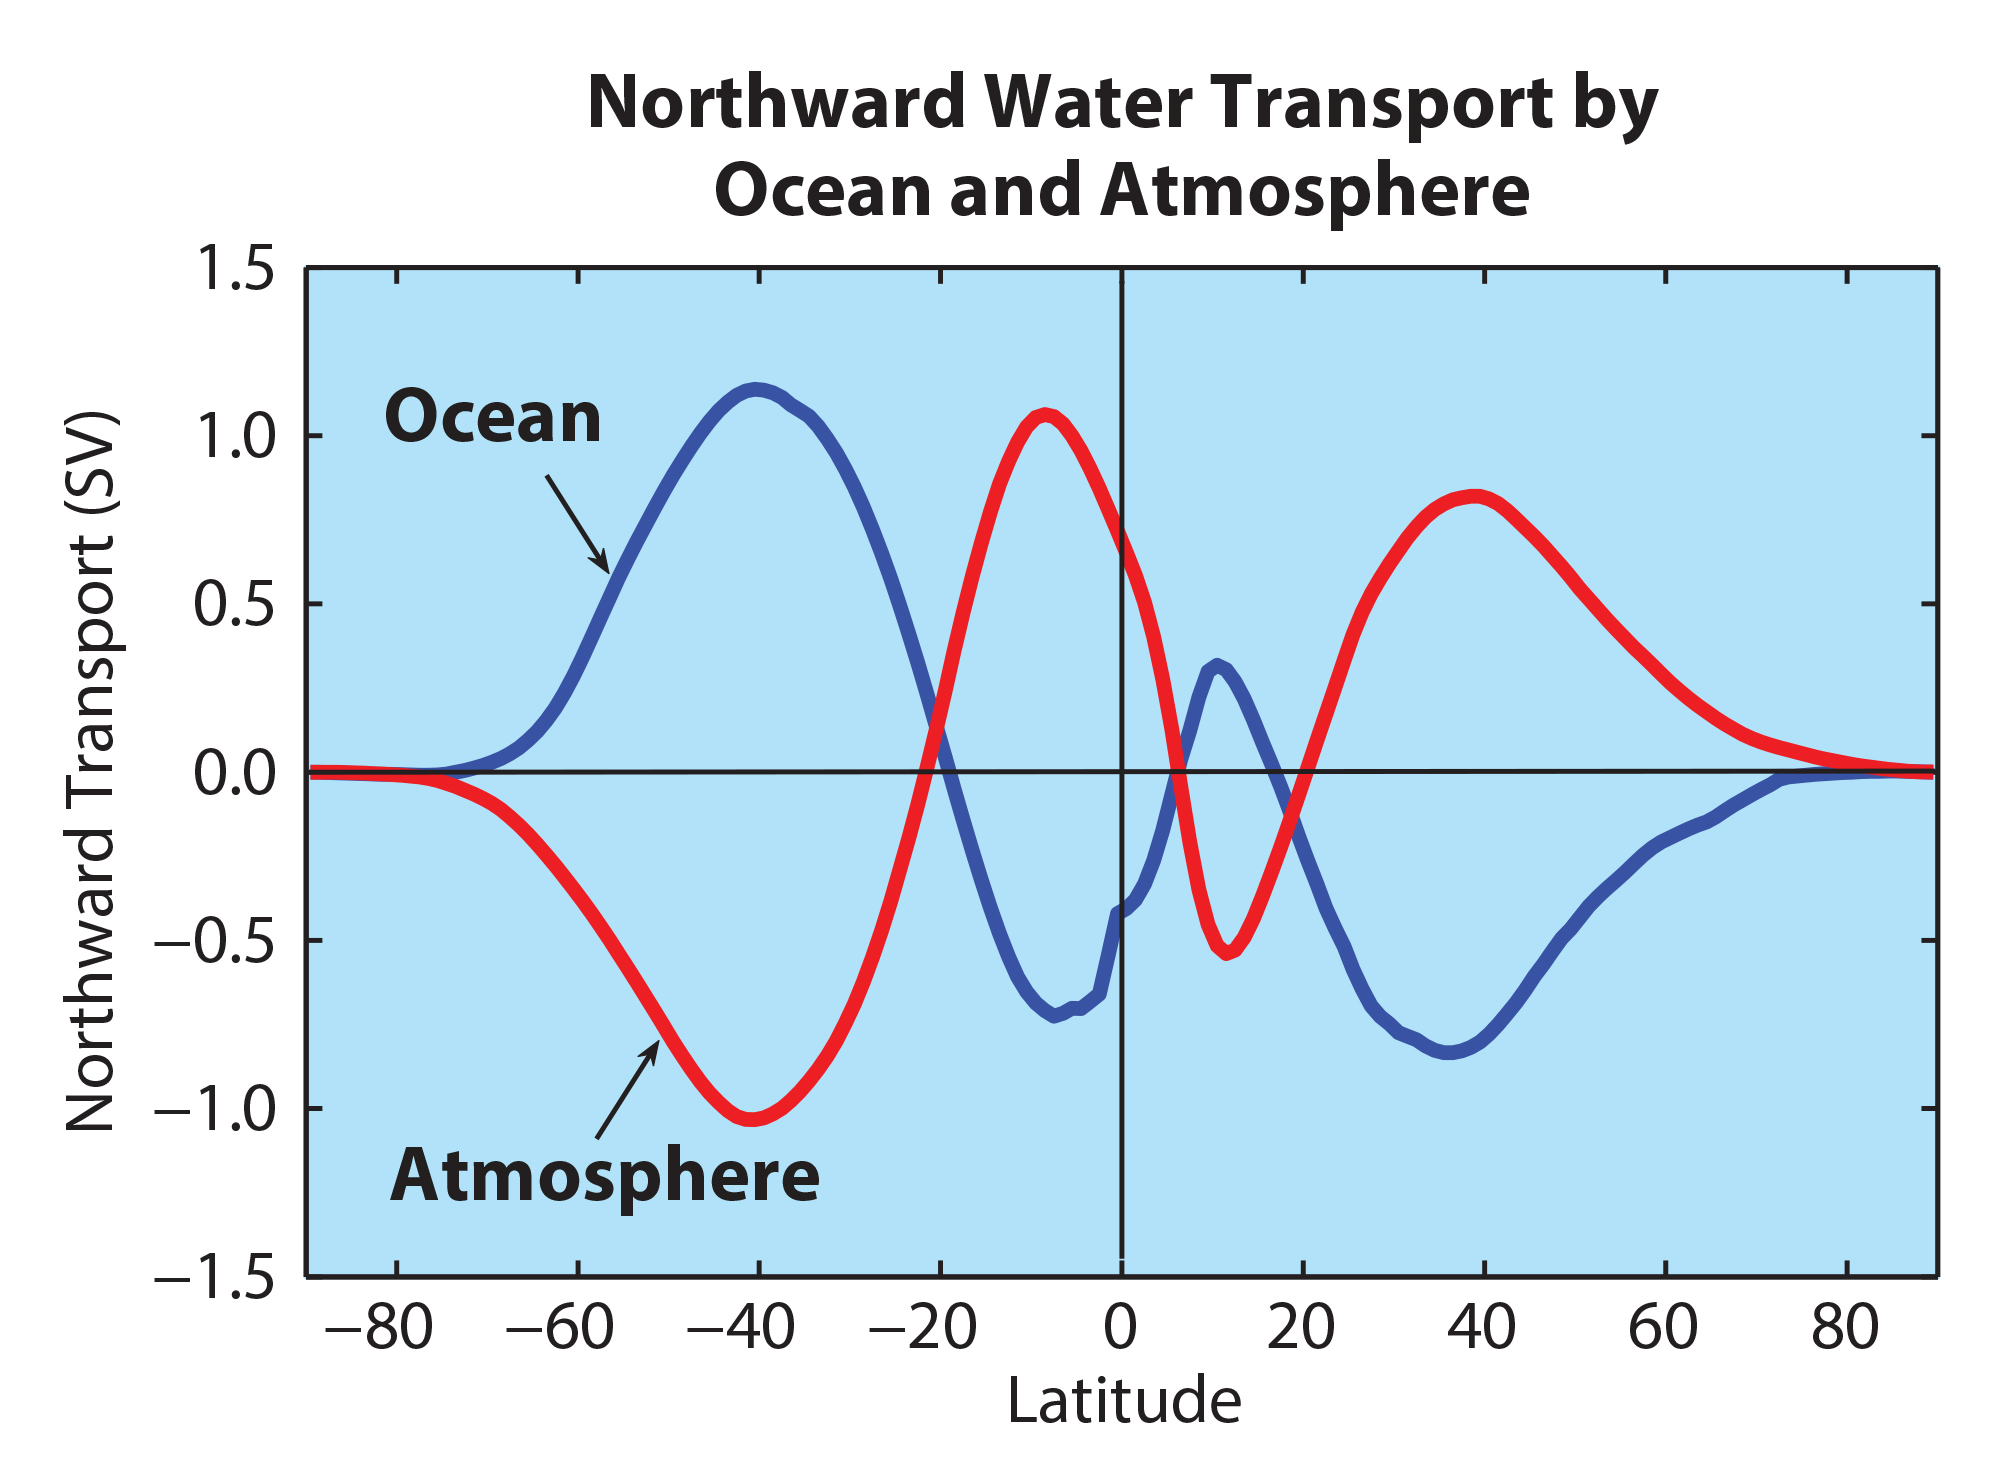 Underwater waves play an important role in oceanic carbon